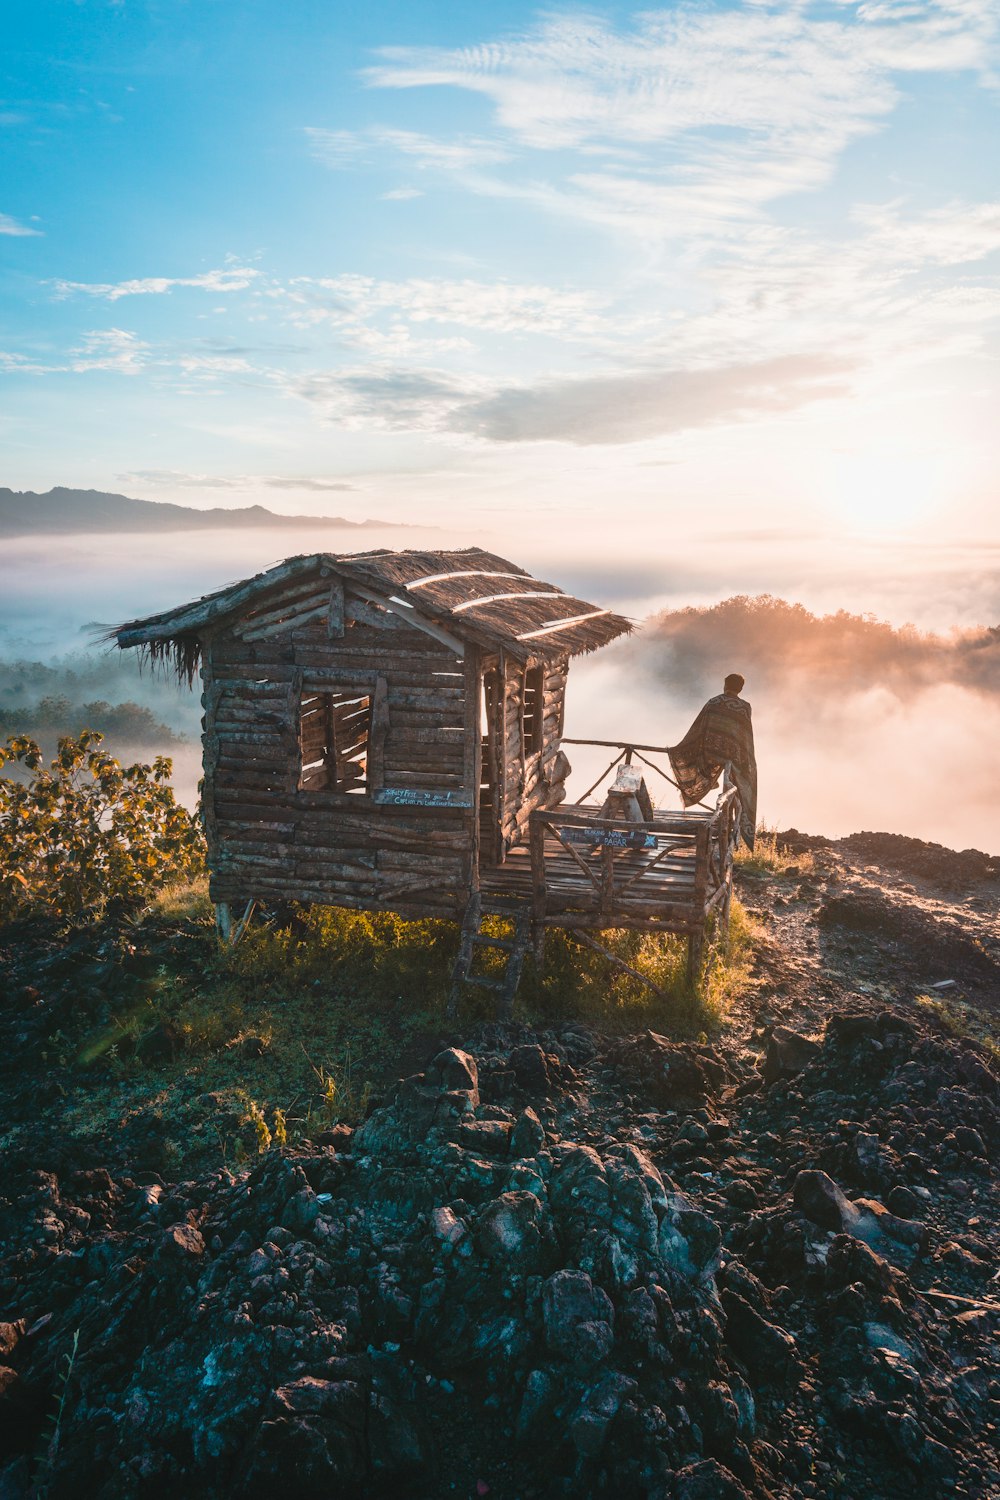 person in wooden cabin on hill